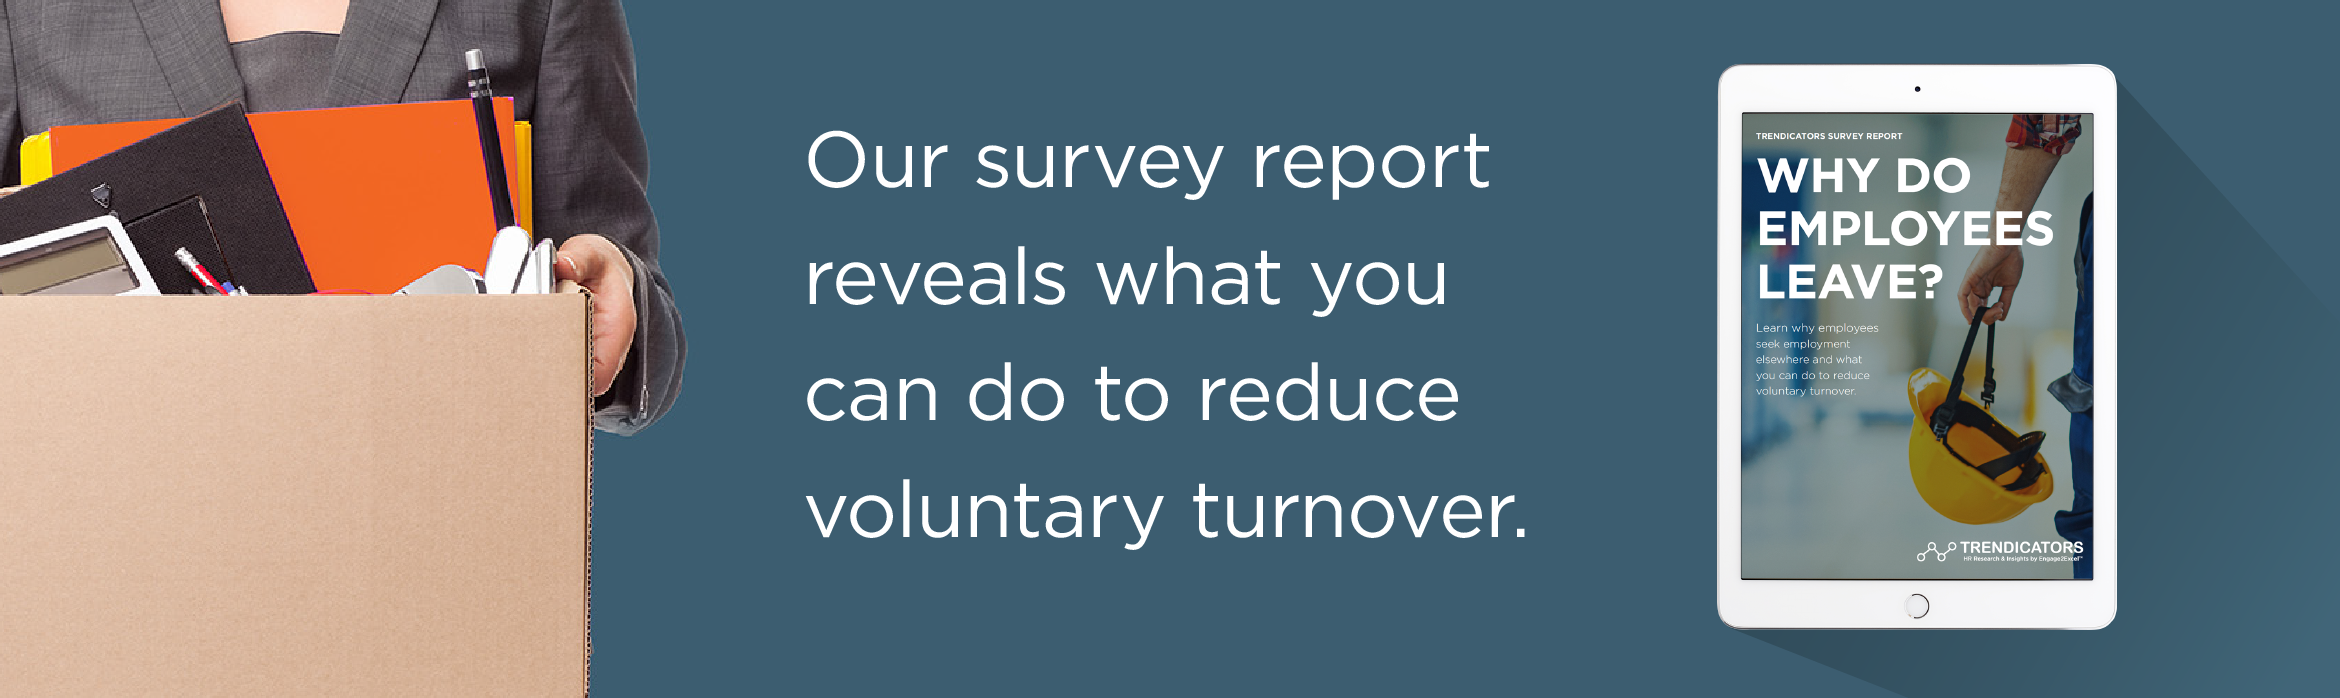 Our national survey reveals what you can do to reduce voluntary turnover.